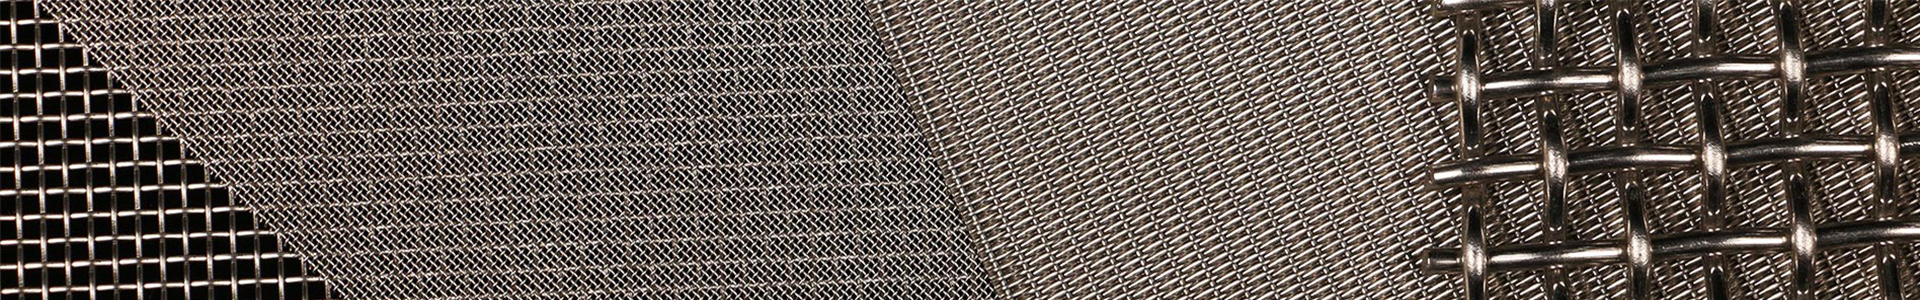 CUSTOMIZED WIRE MESH 